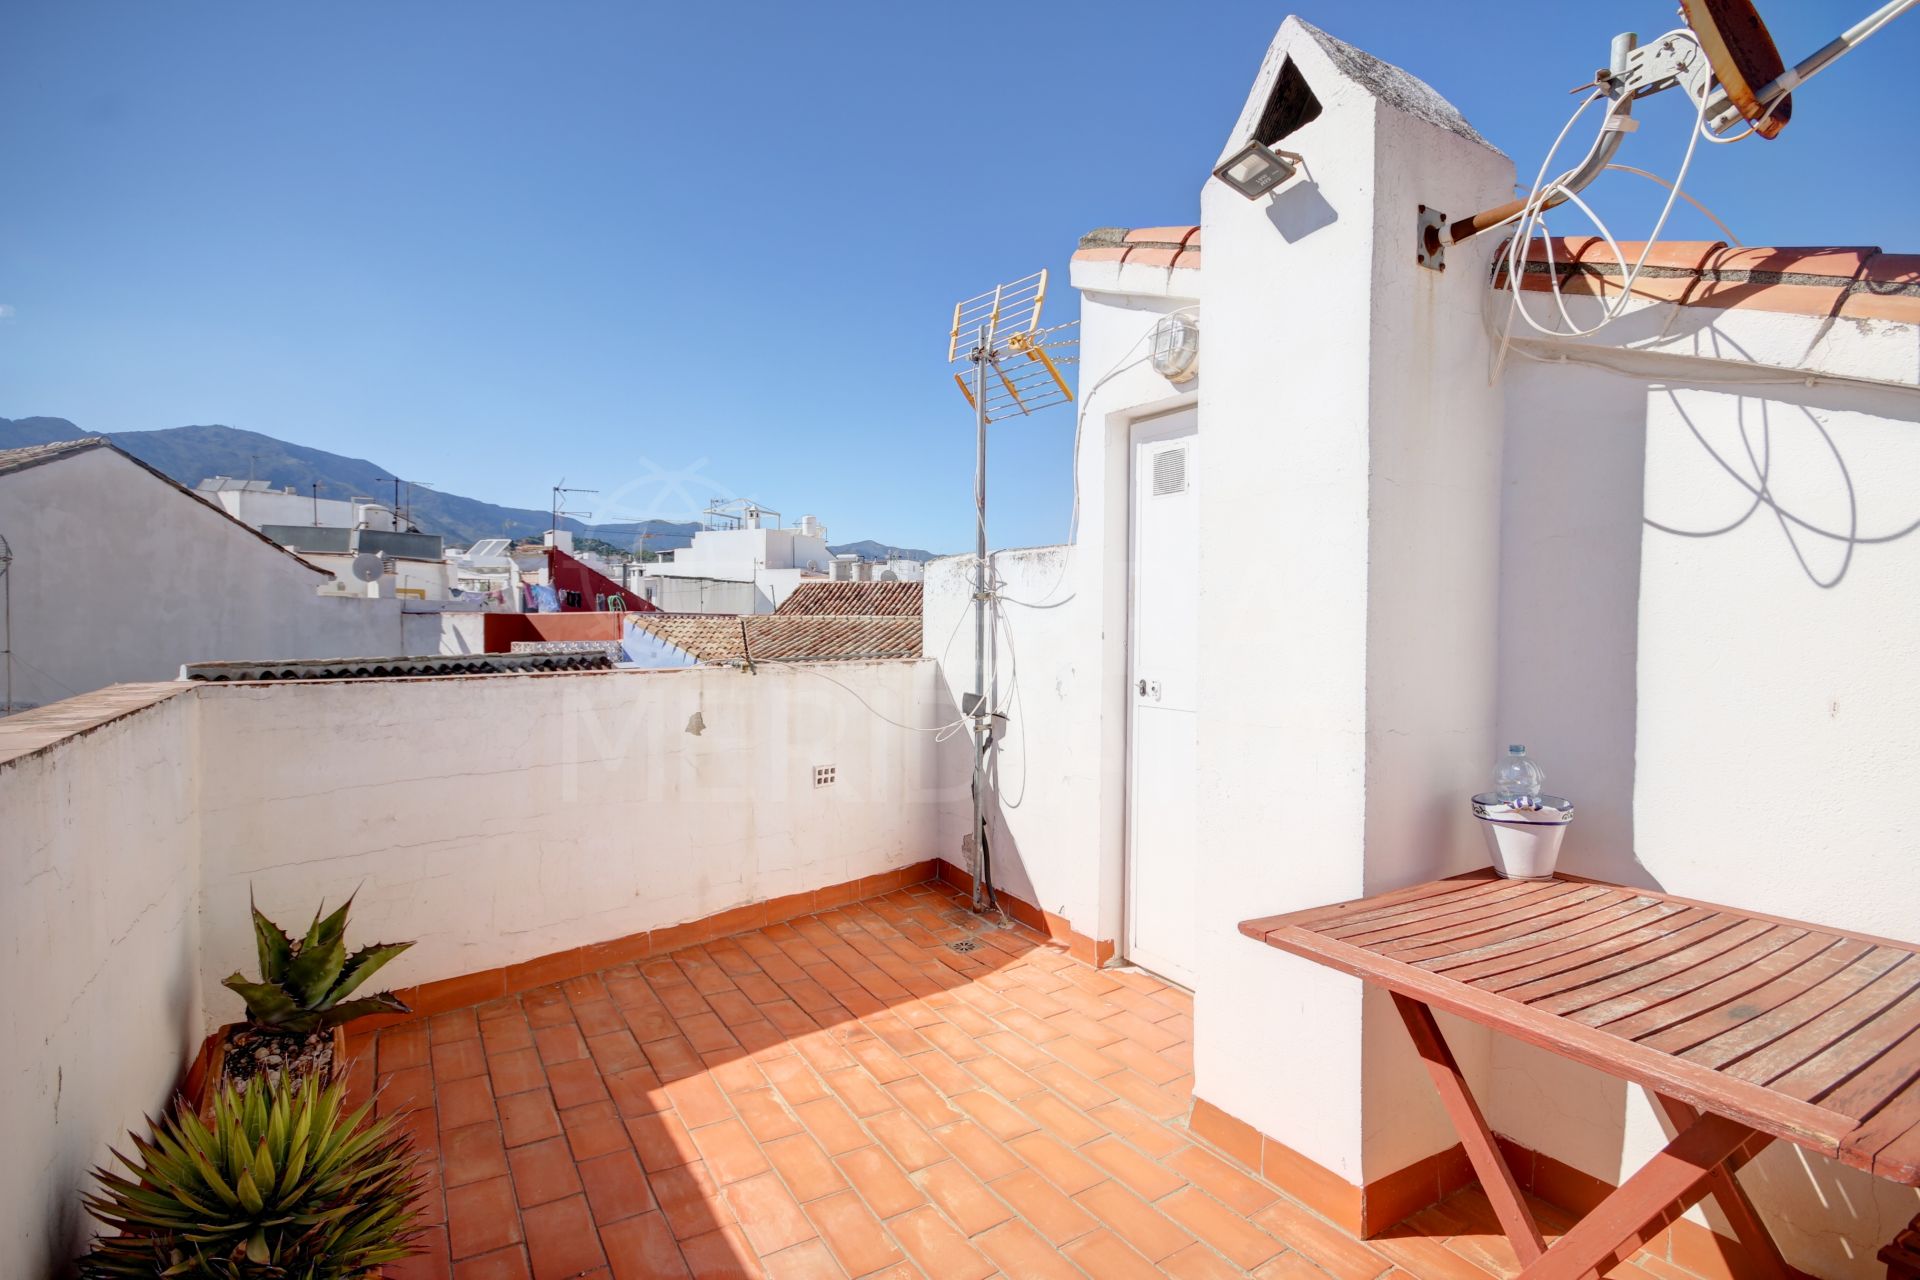 Duplex apartment for sale close to the beach in the old town centre of Estepona